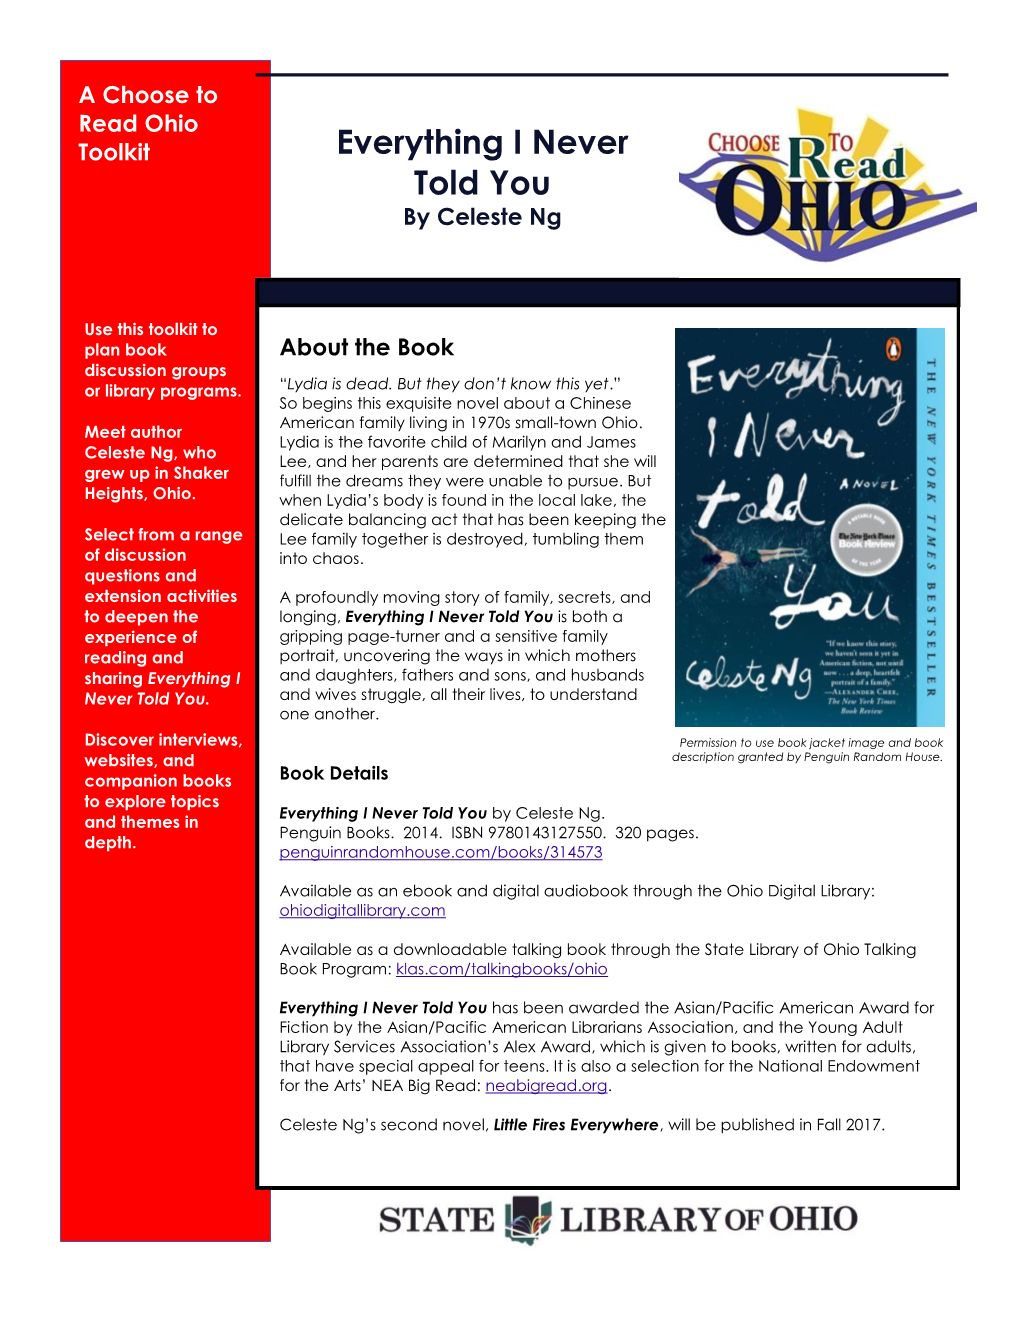 Read Ohio Toolkit for Everything I Never Told